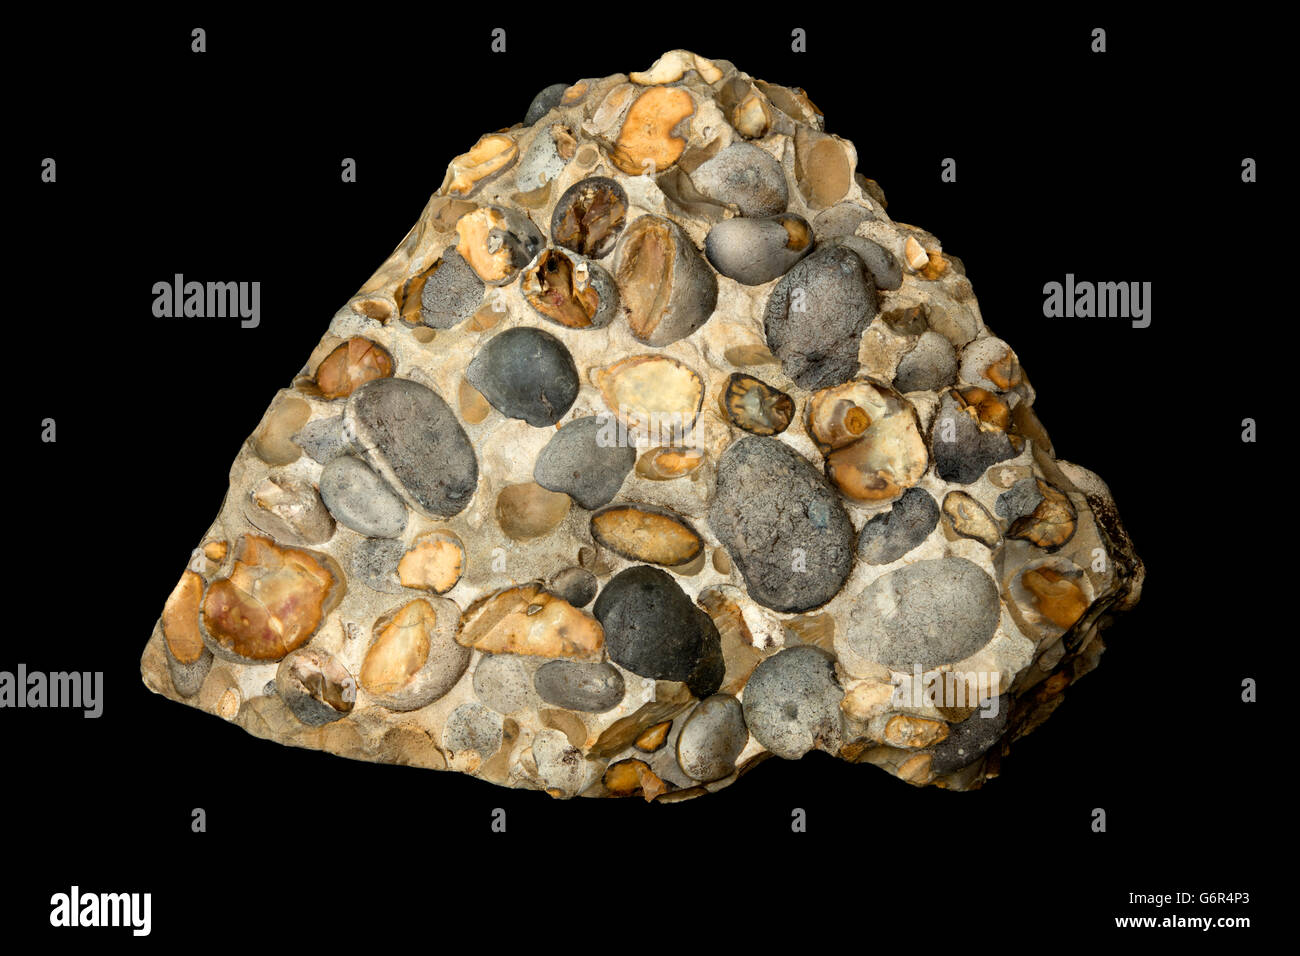 Hertfordshire puddingstone ,conglomerate sedimentary rock, rounded flint pebbles cemented together by a younger matrix of silica Stock Photo